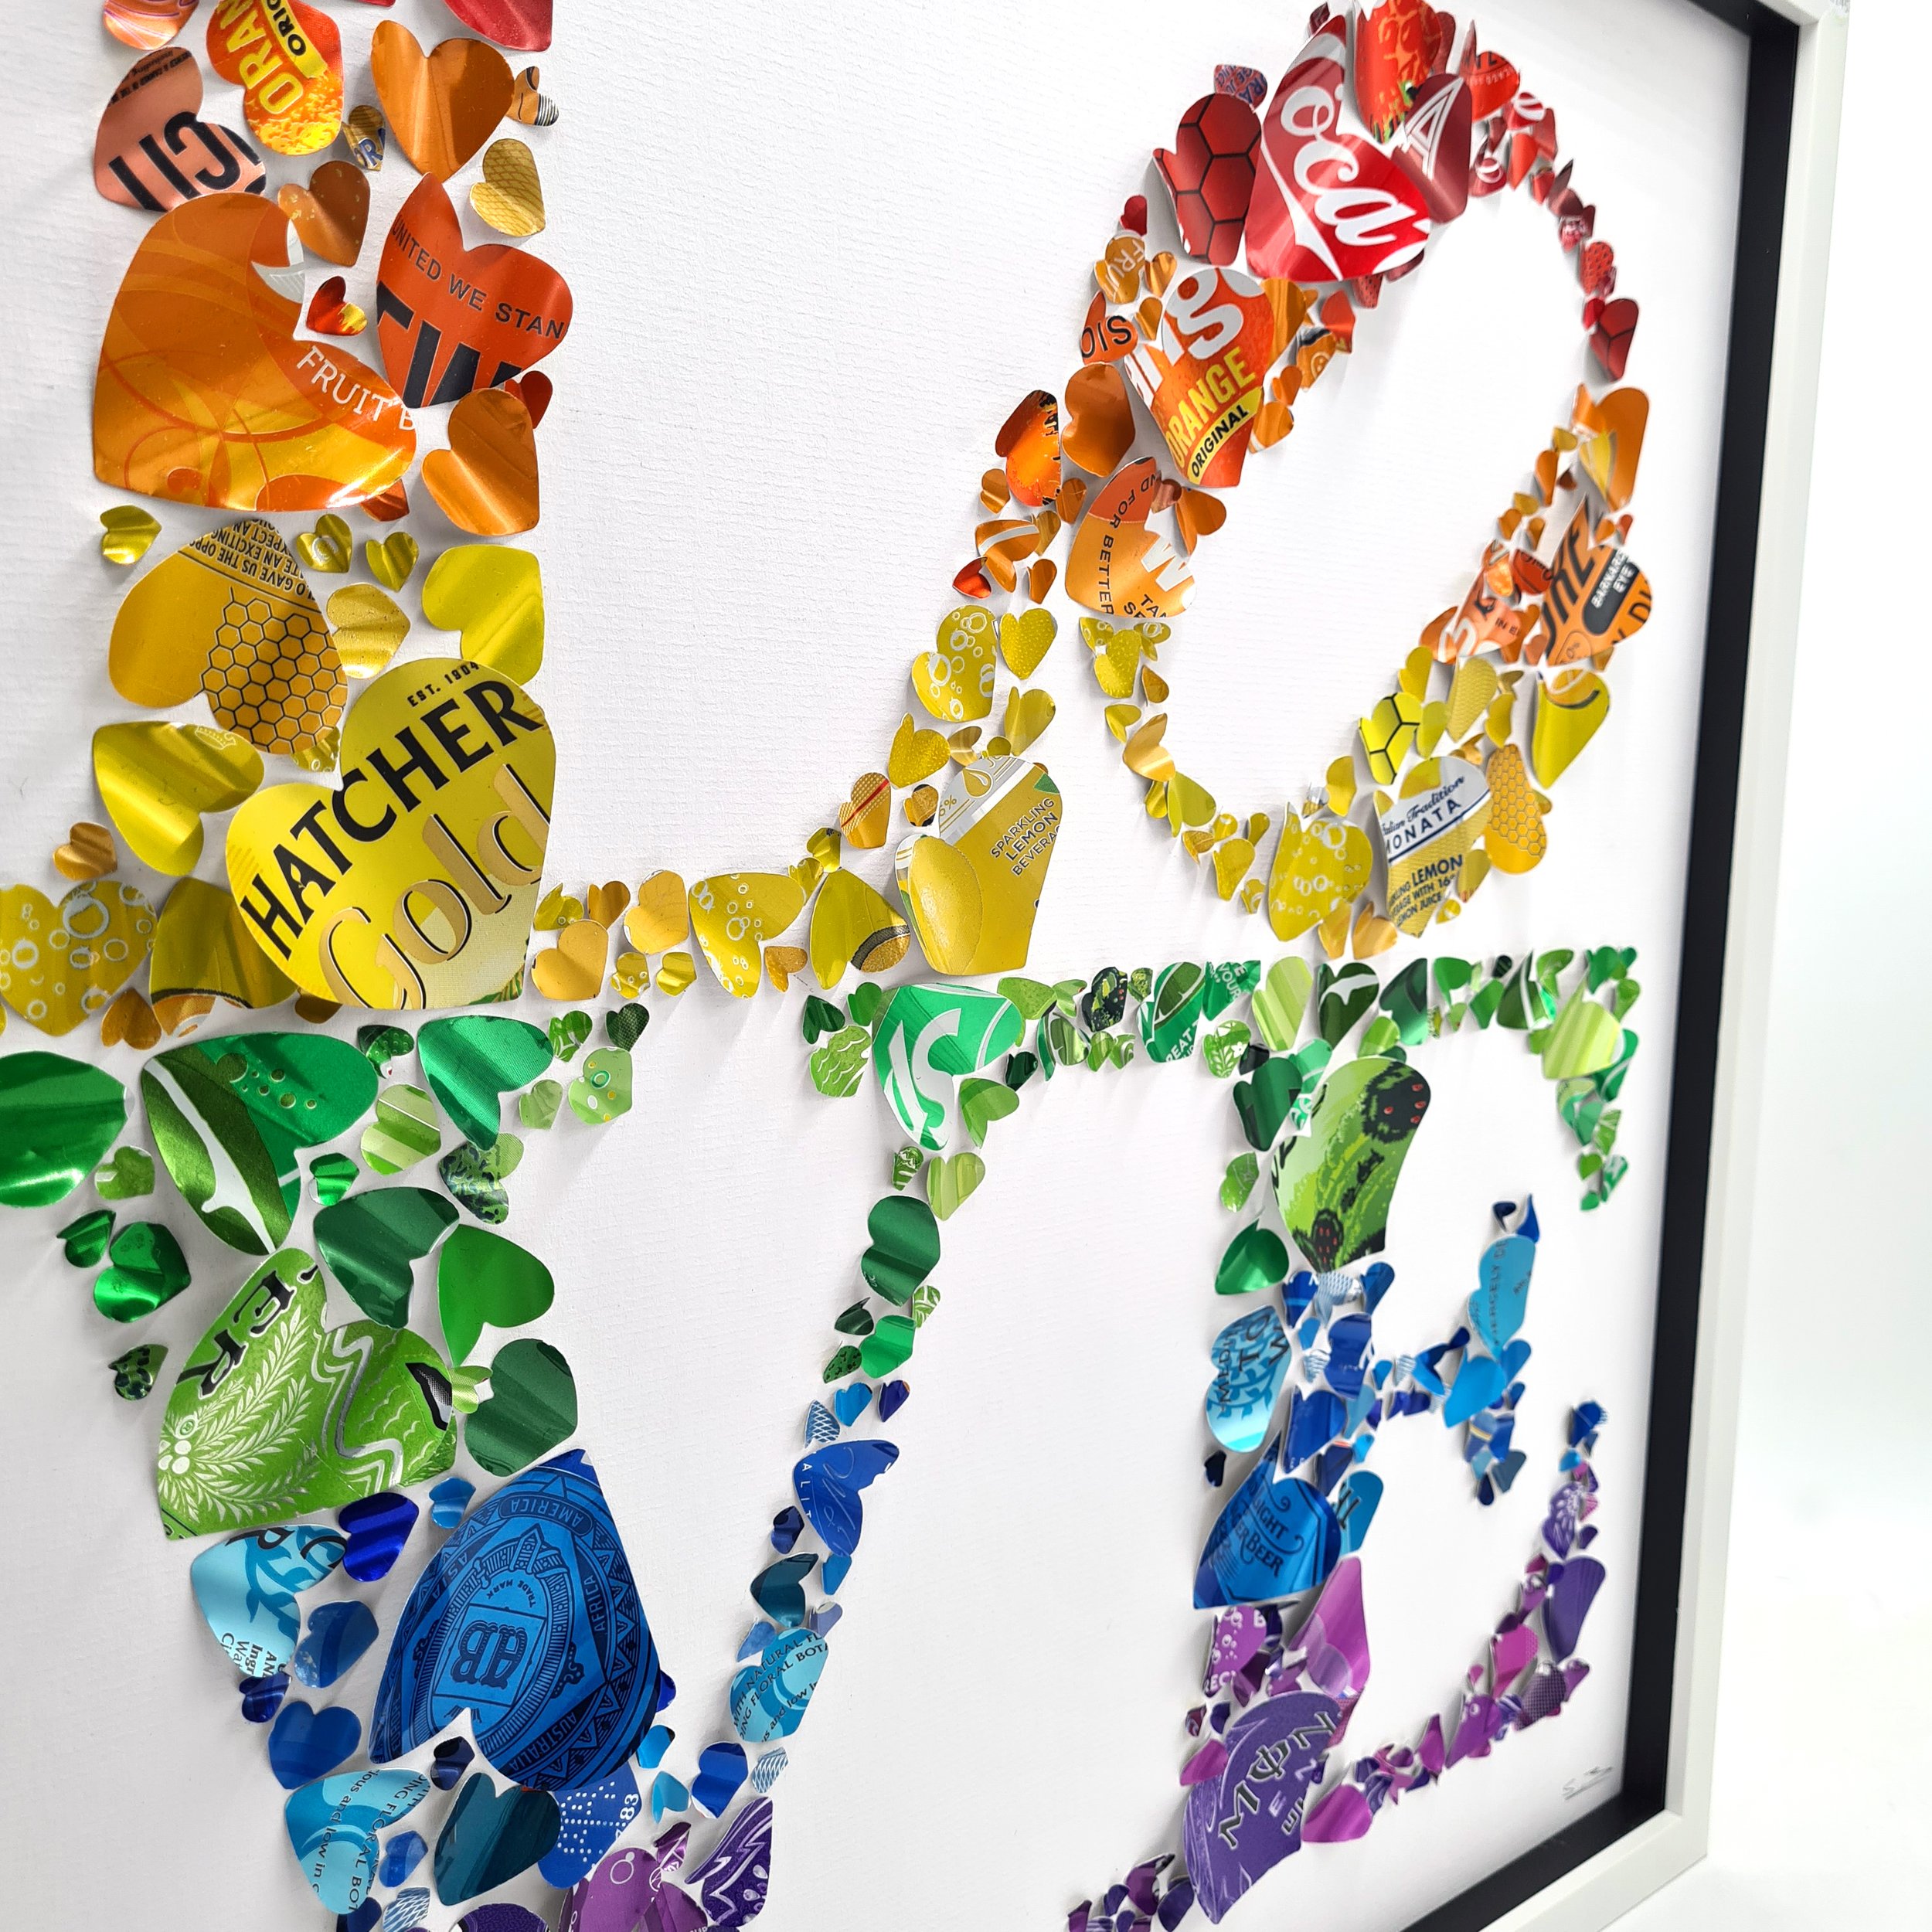 Robert Indiana's Love sculpture made from rainbow coloured aluminium cans